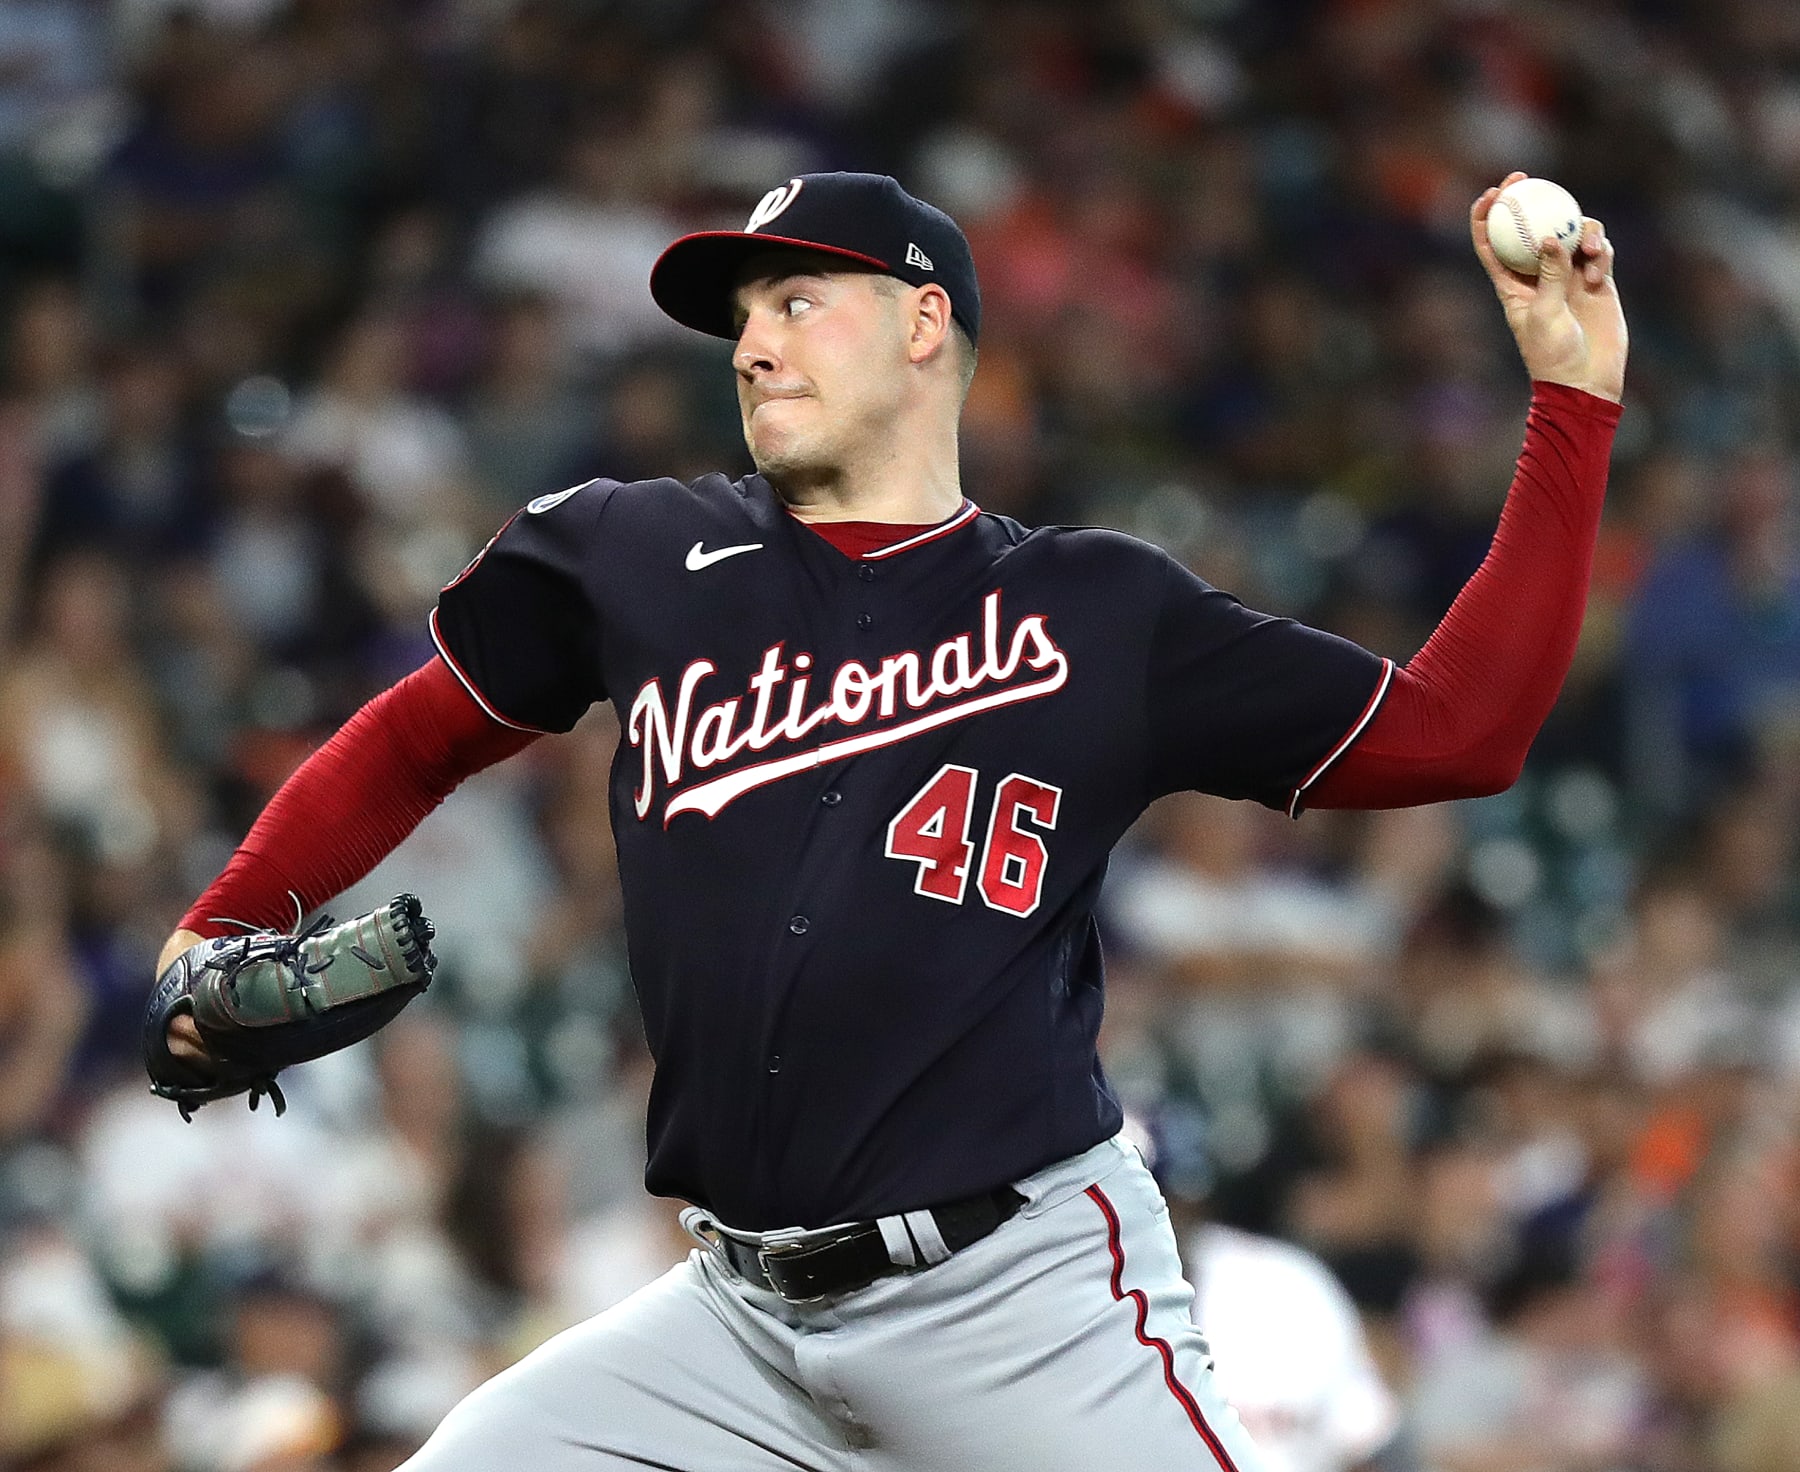 Braves will face persistent Nationals pitcher Patrick Corbin on opening day